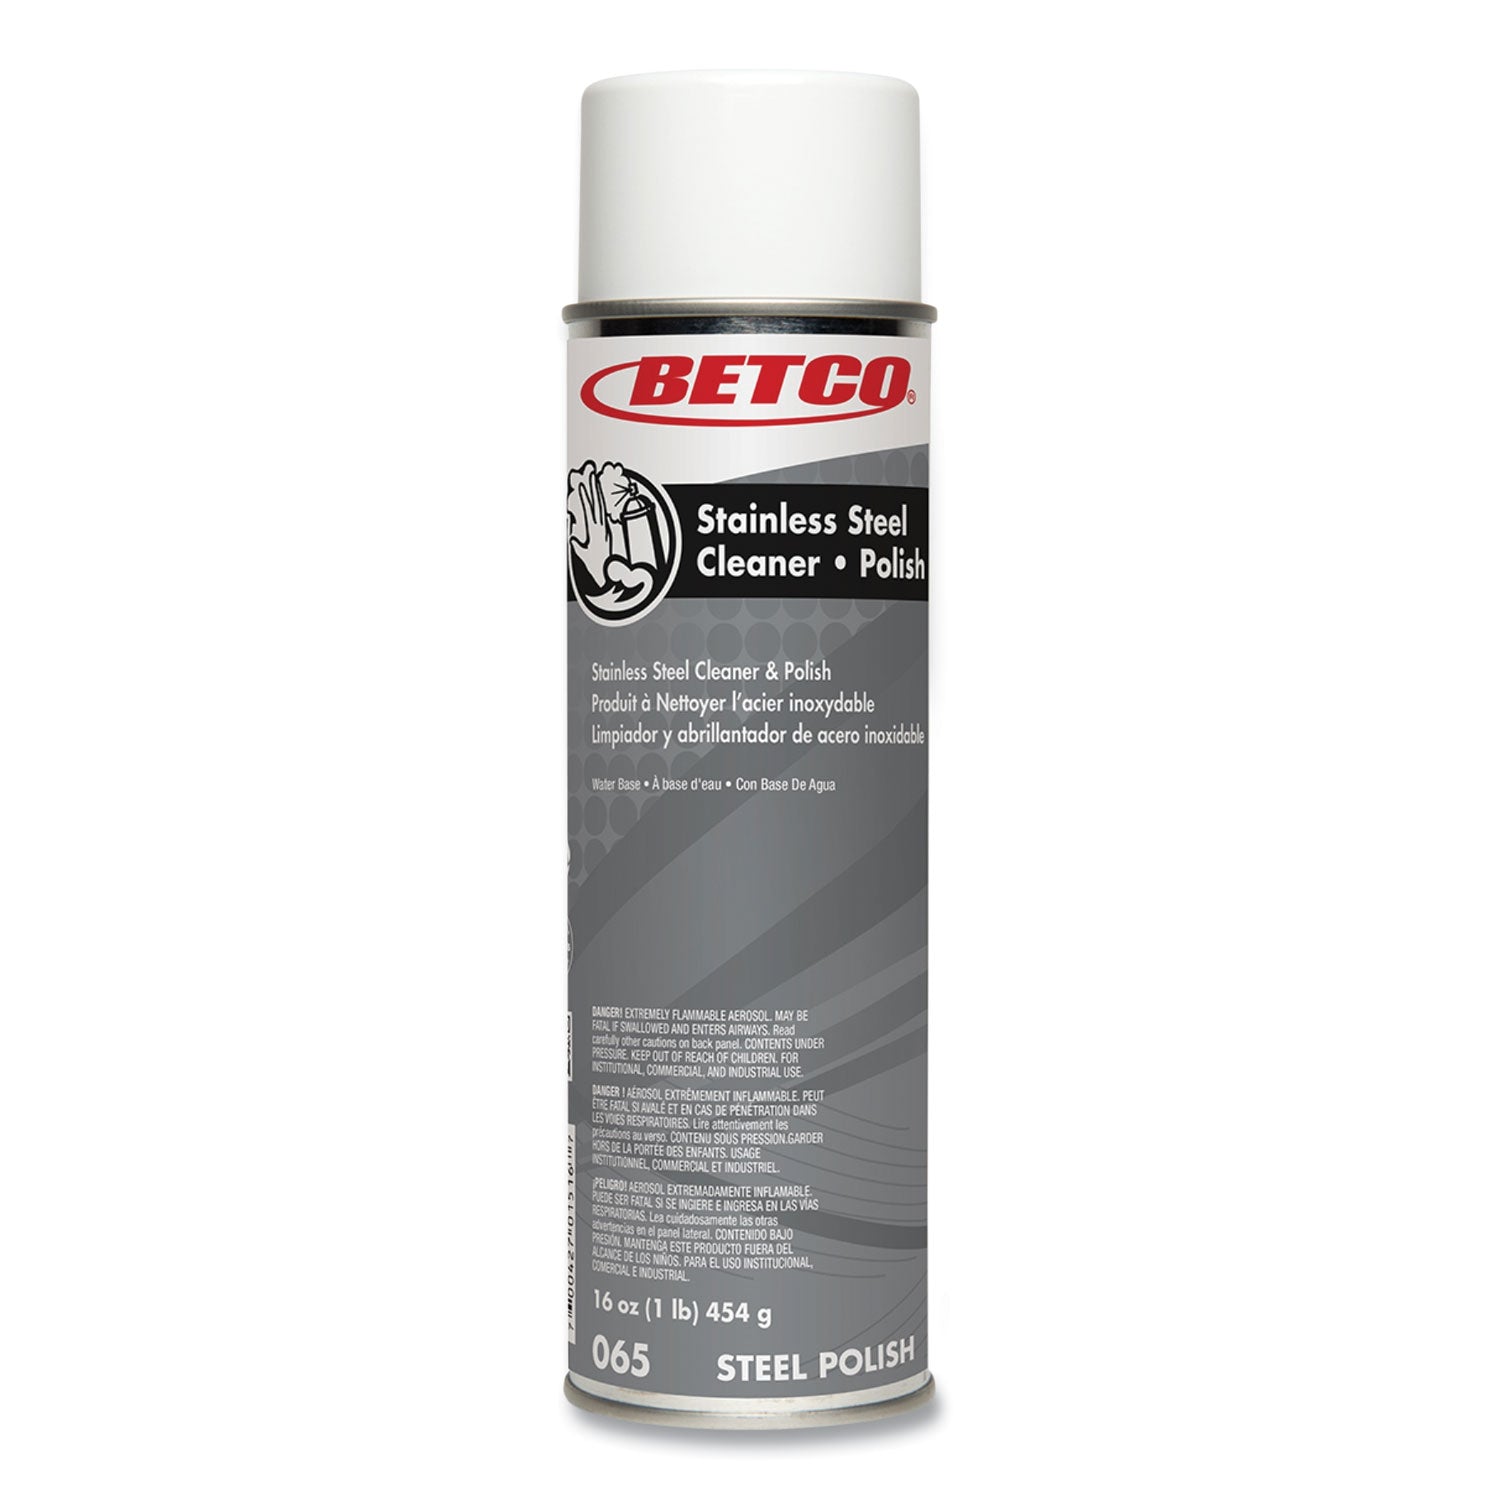 stainless-steel-cleaner-and-polish-characteristic-scent-16-oz-aerosol-spray-12-carton_bet652300 - 1